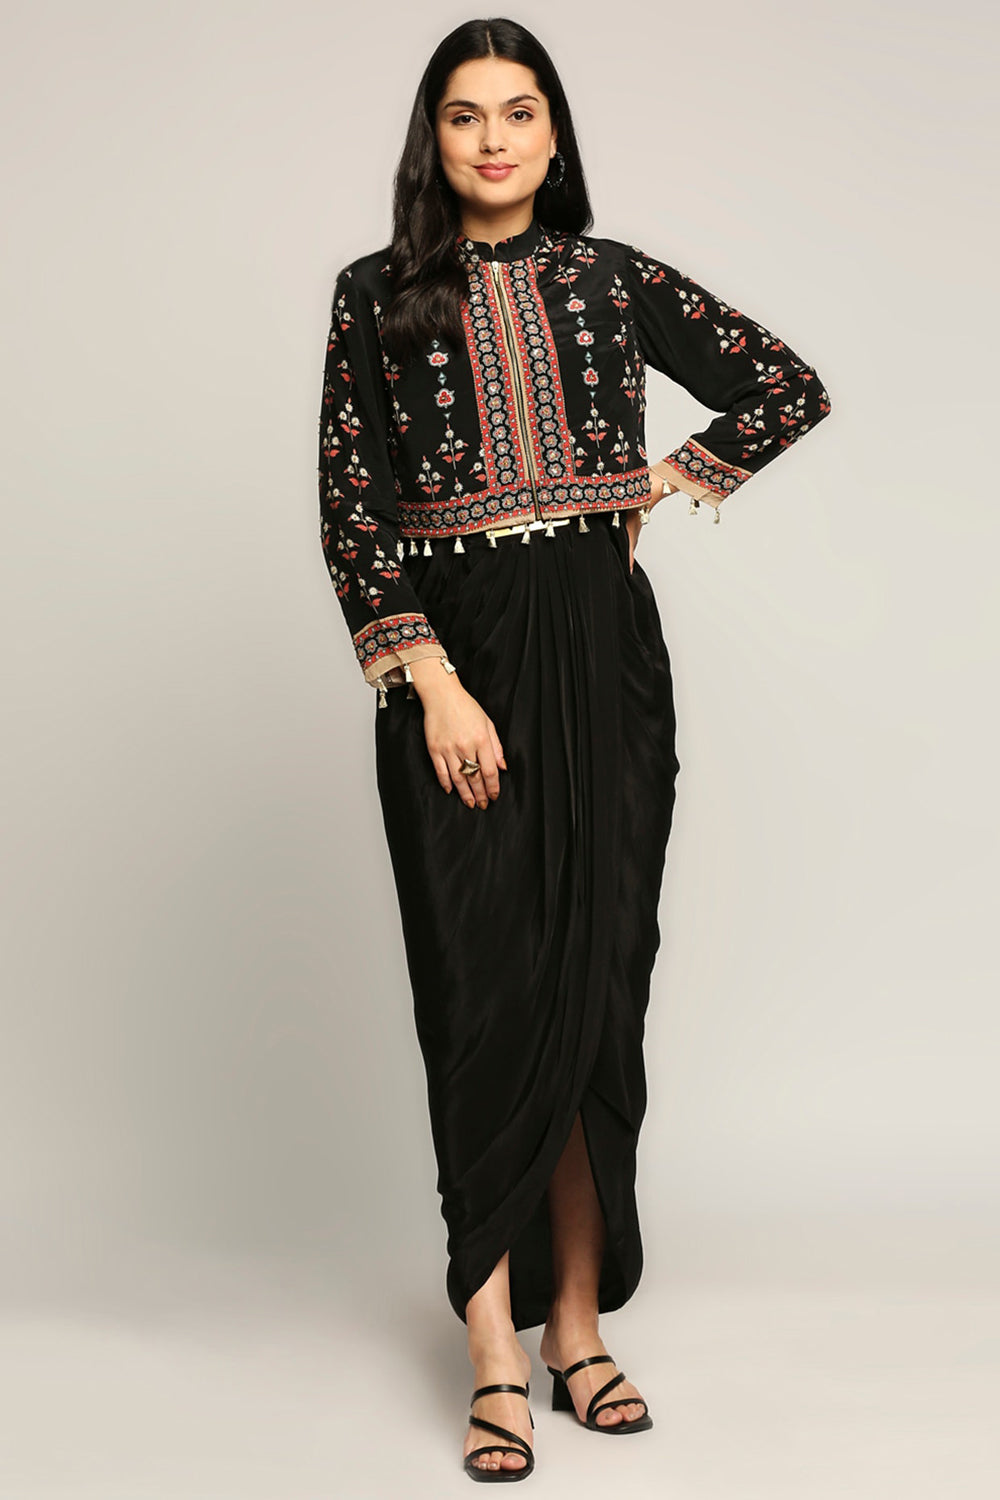 Ethnic Folklore Printed Top With Drape Skirt